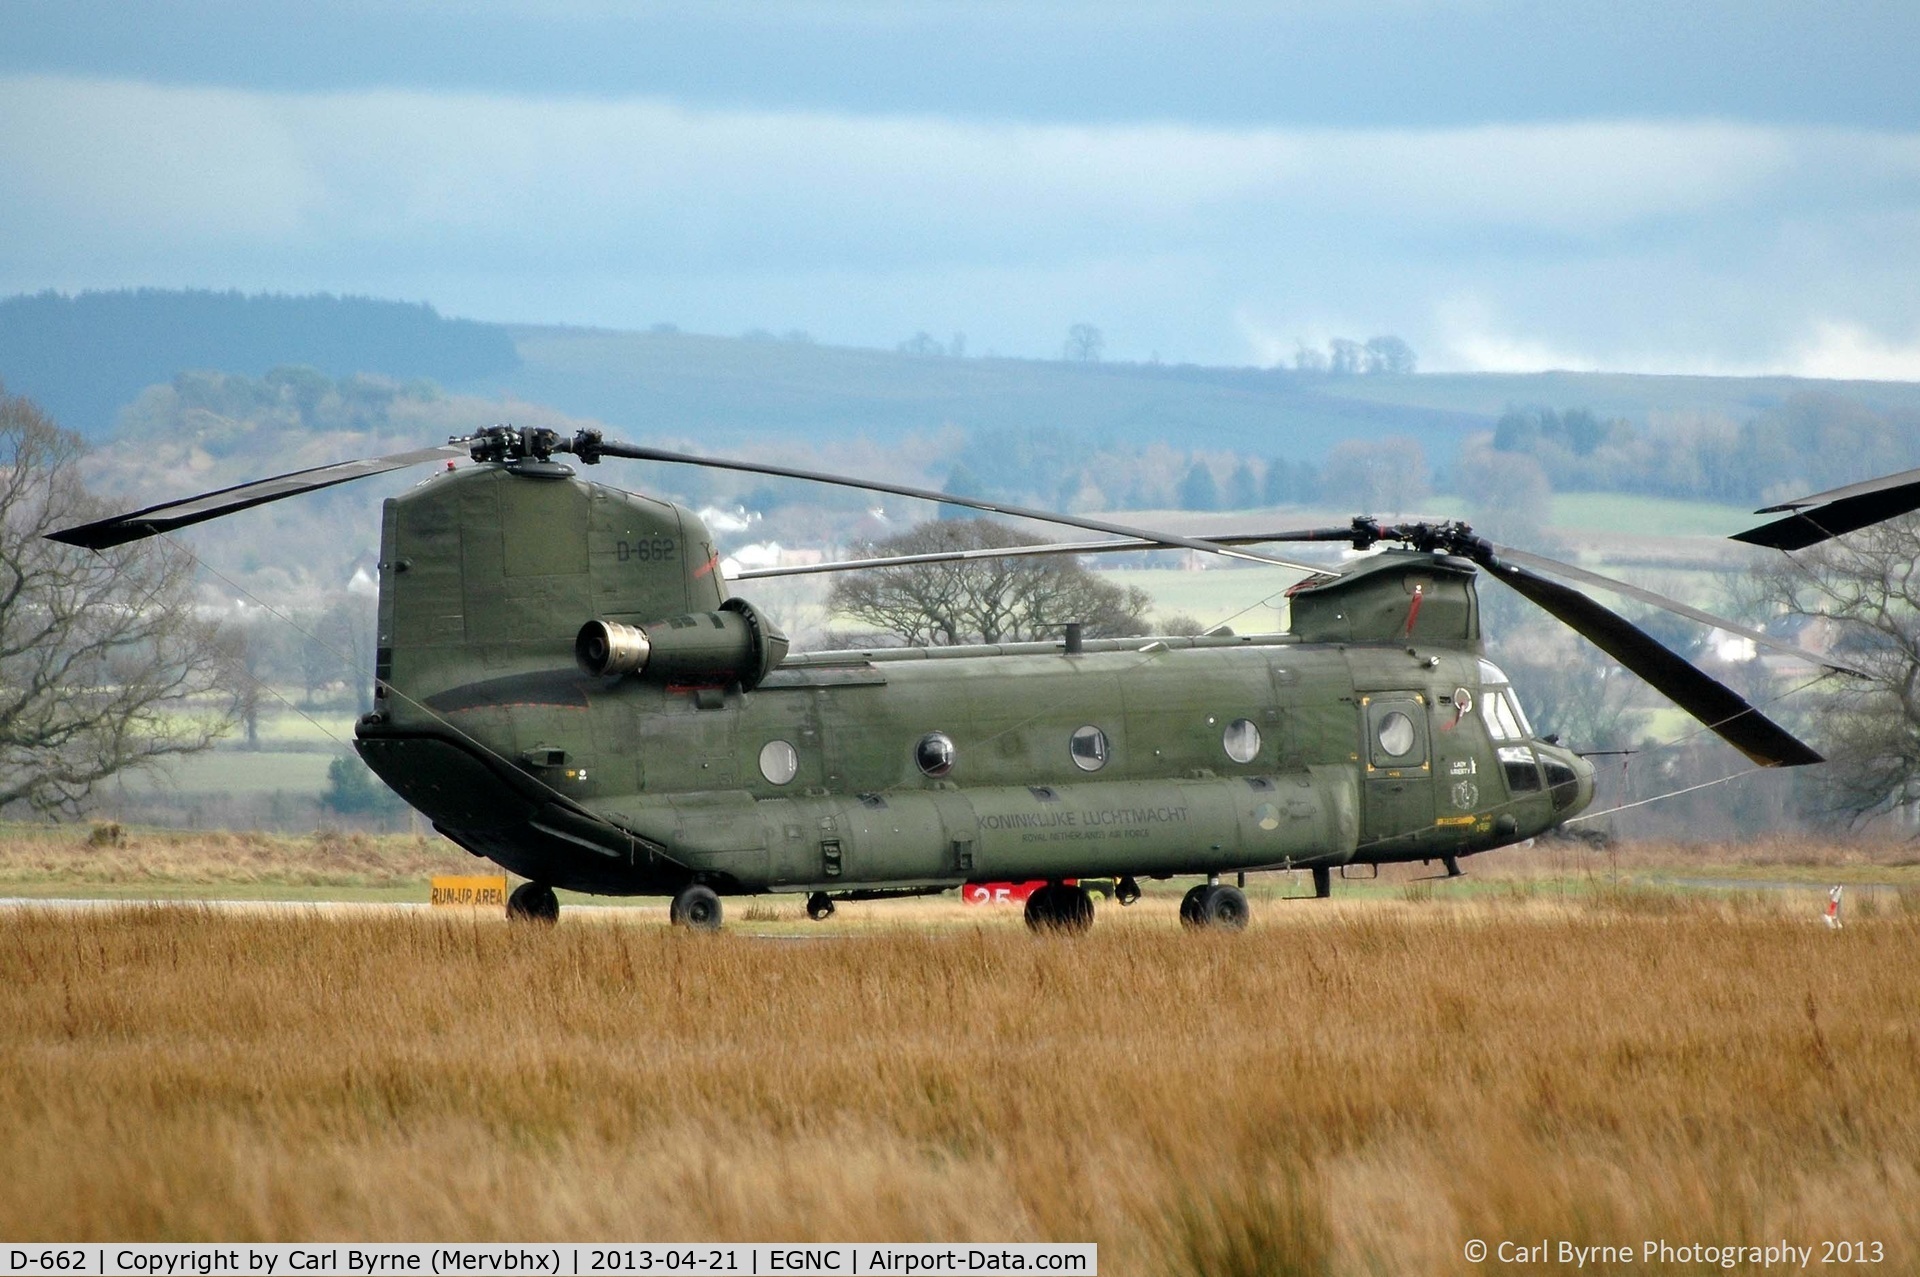 D-662, Boeing CH-47D Chinook C/N M.3662/NL-002, Here for the annual exercise.